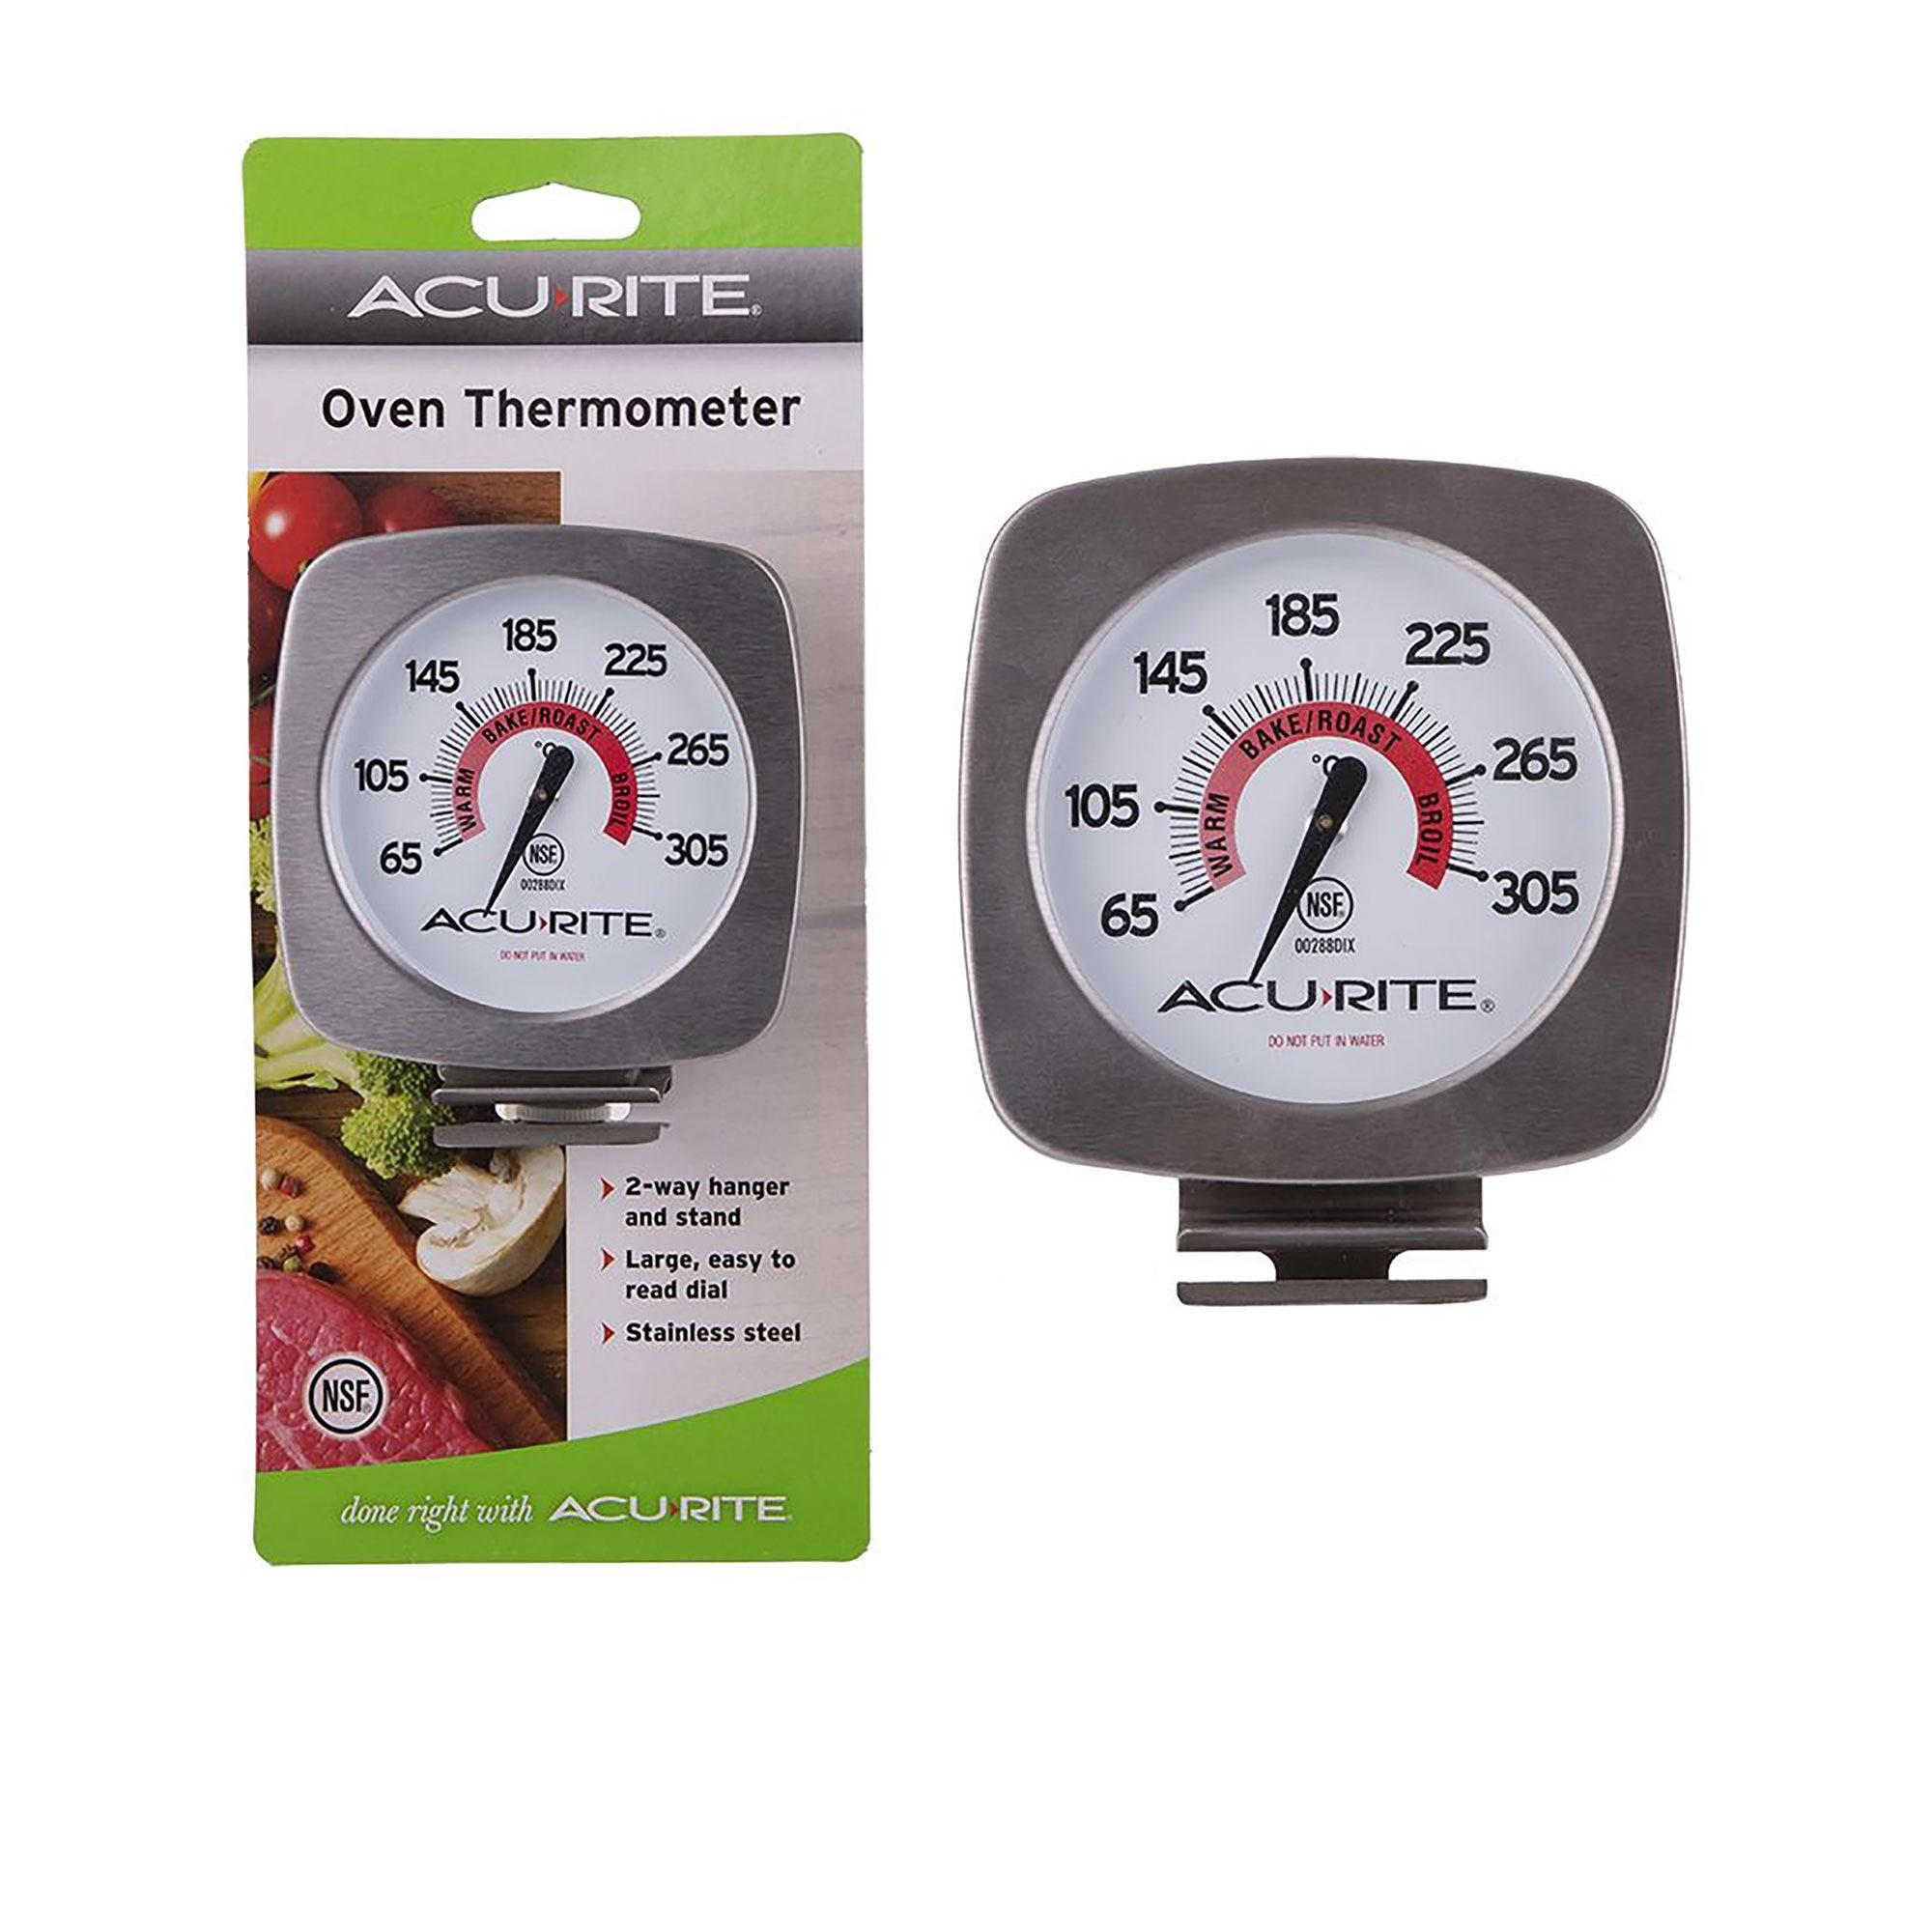 Acurite Gourmet Oven Thermometer Image 3